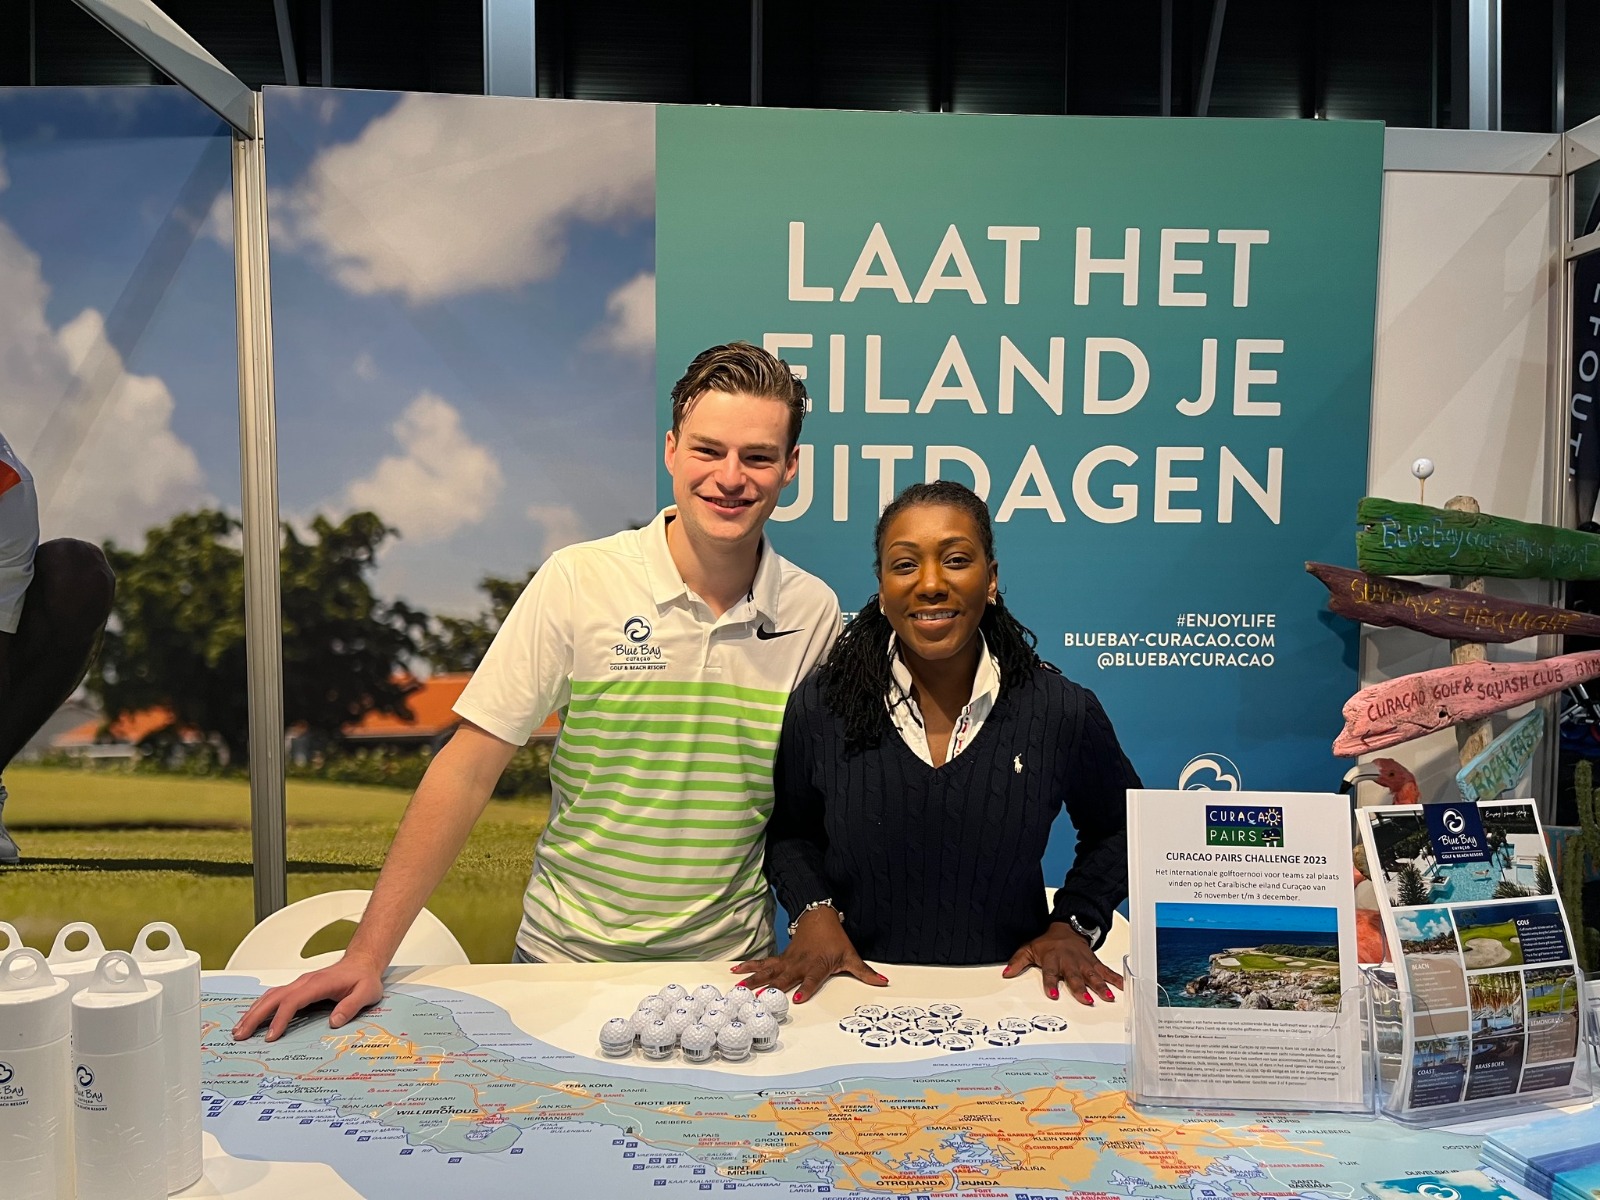 Curacao For The First Time At The Holland Golf Show